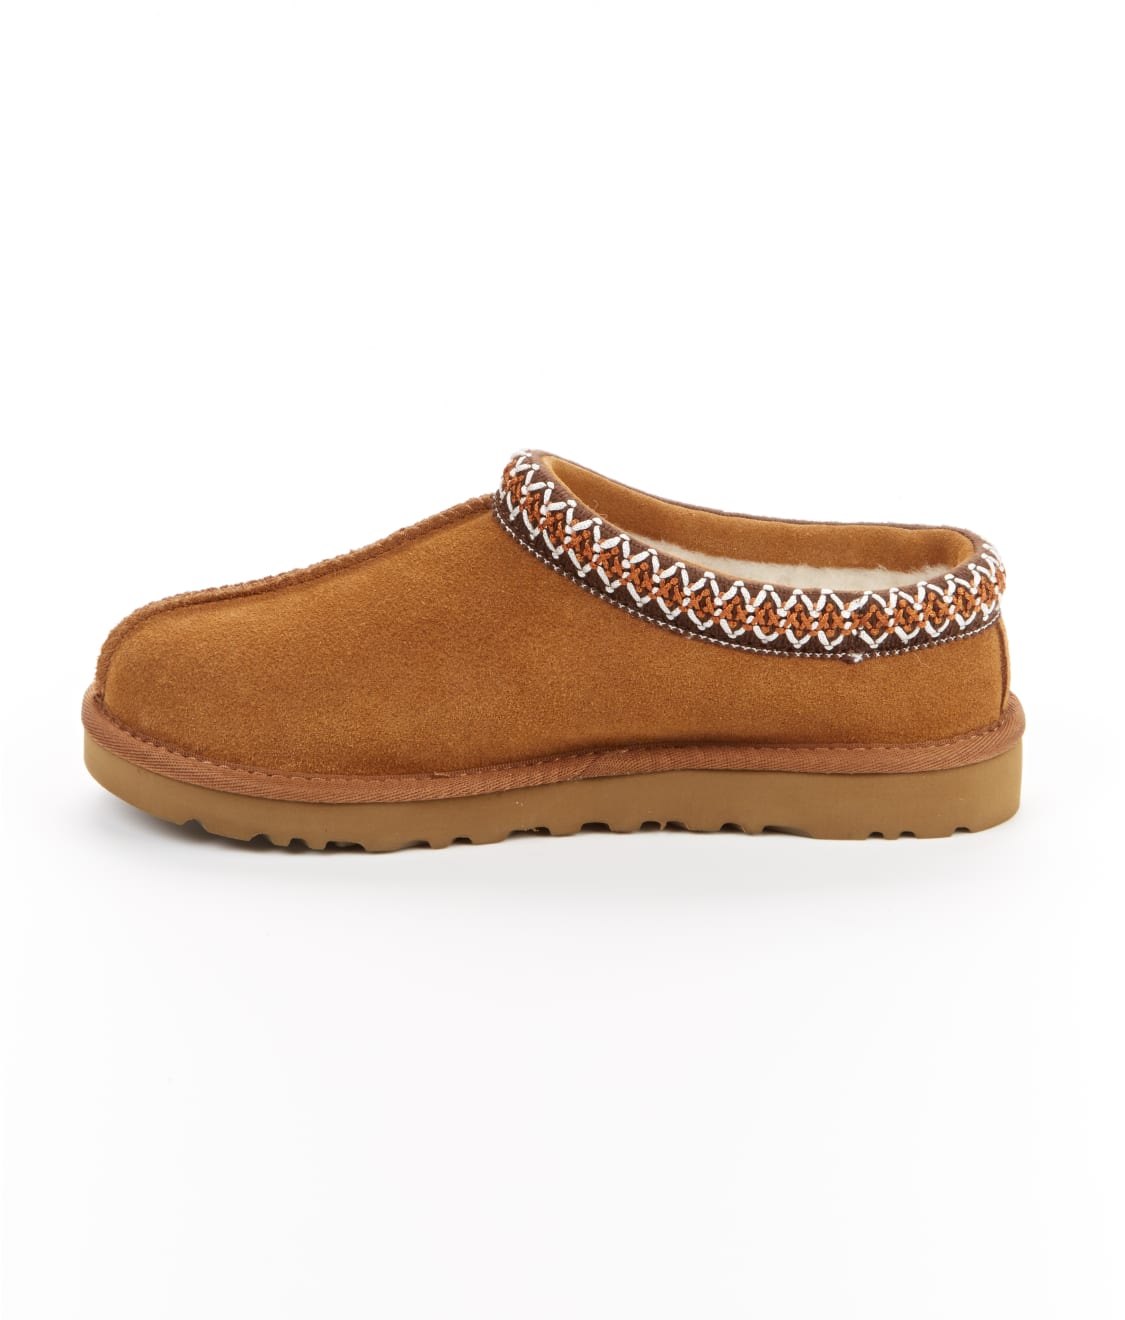 UGG Tasman Slippers & Reviews | Bare Necessities (Style 5955)